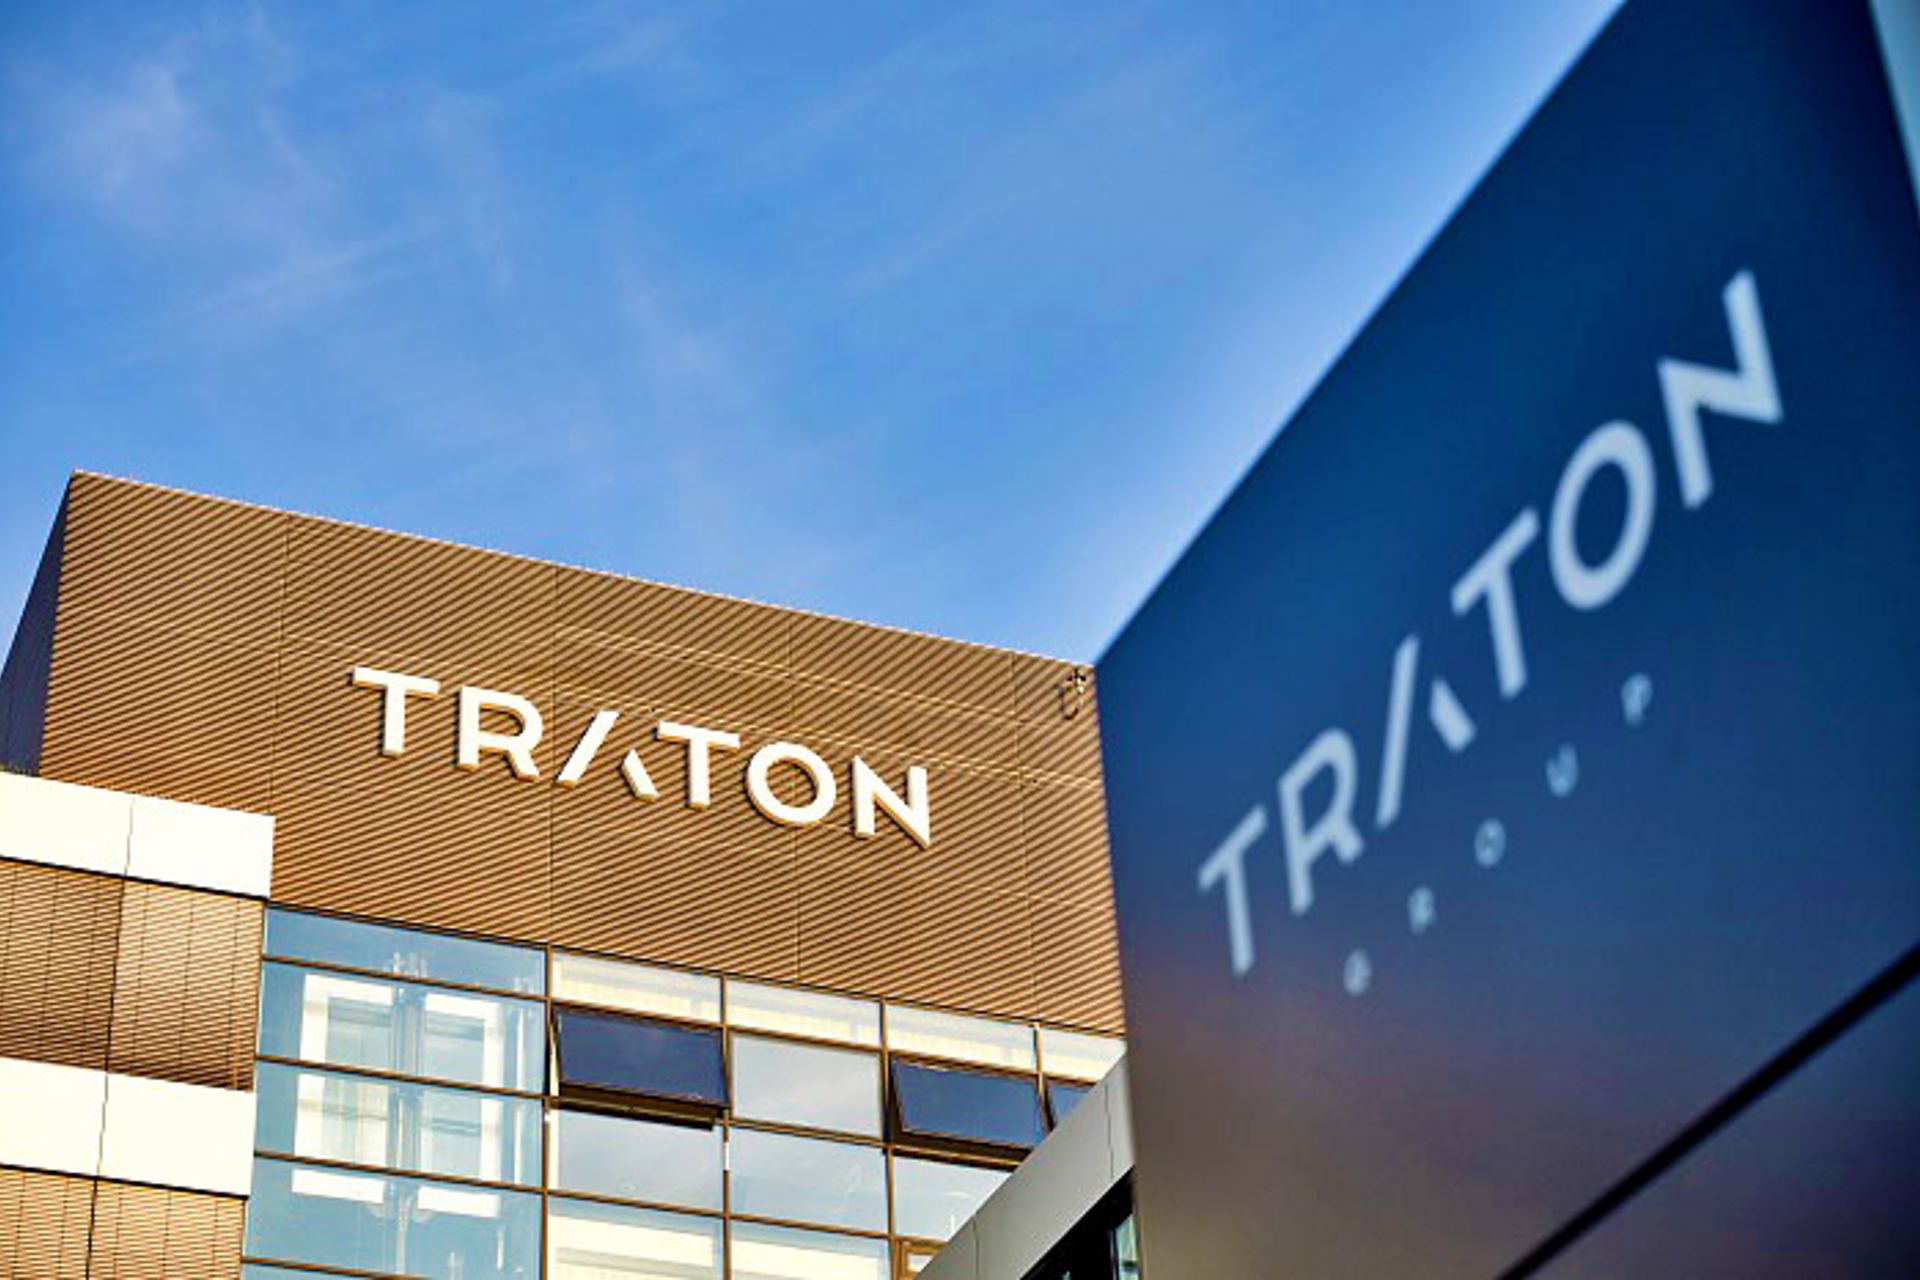 Buildings with TRATON Logo